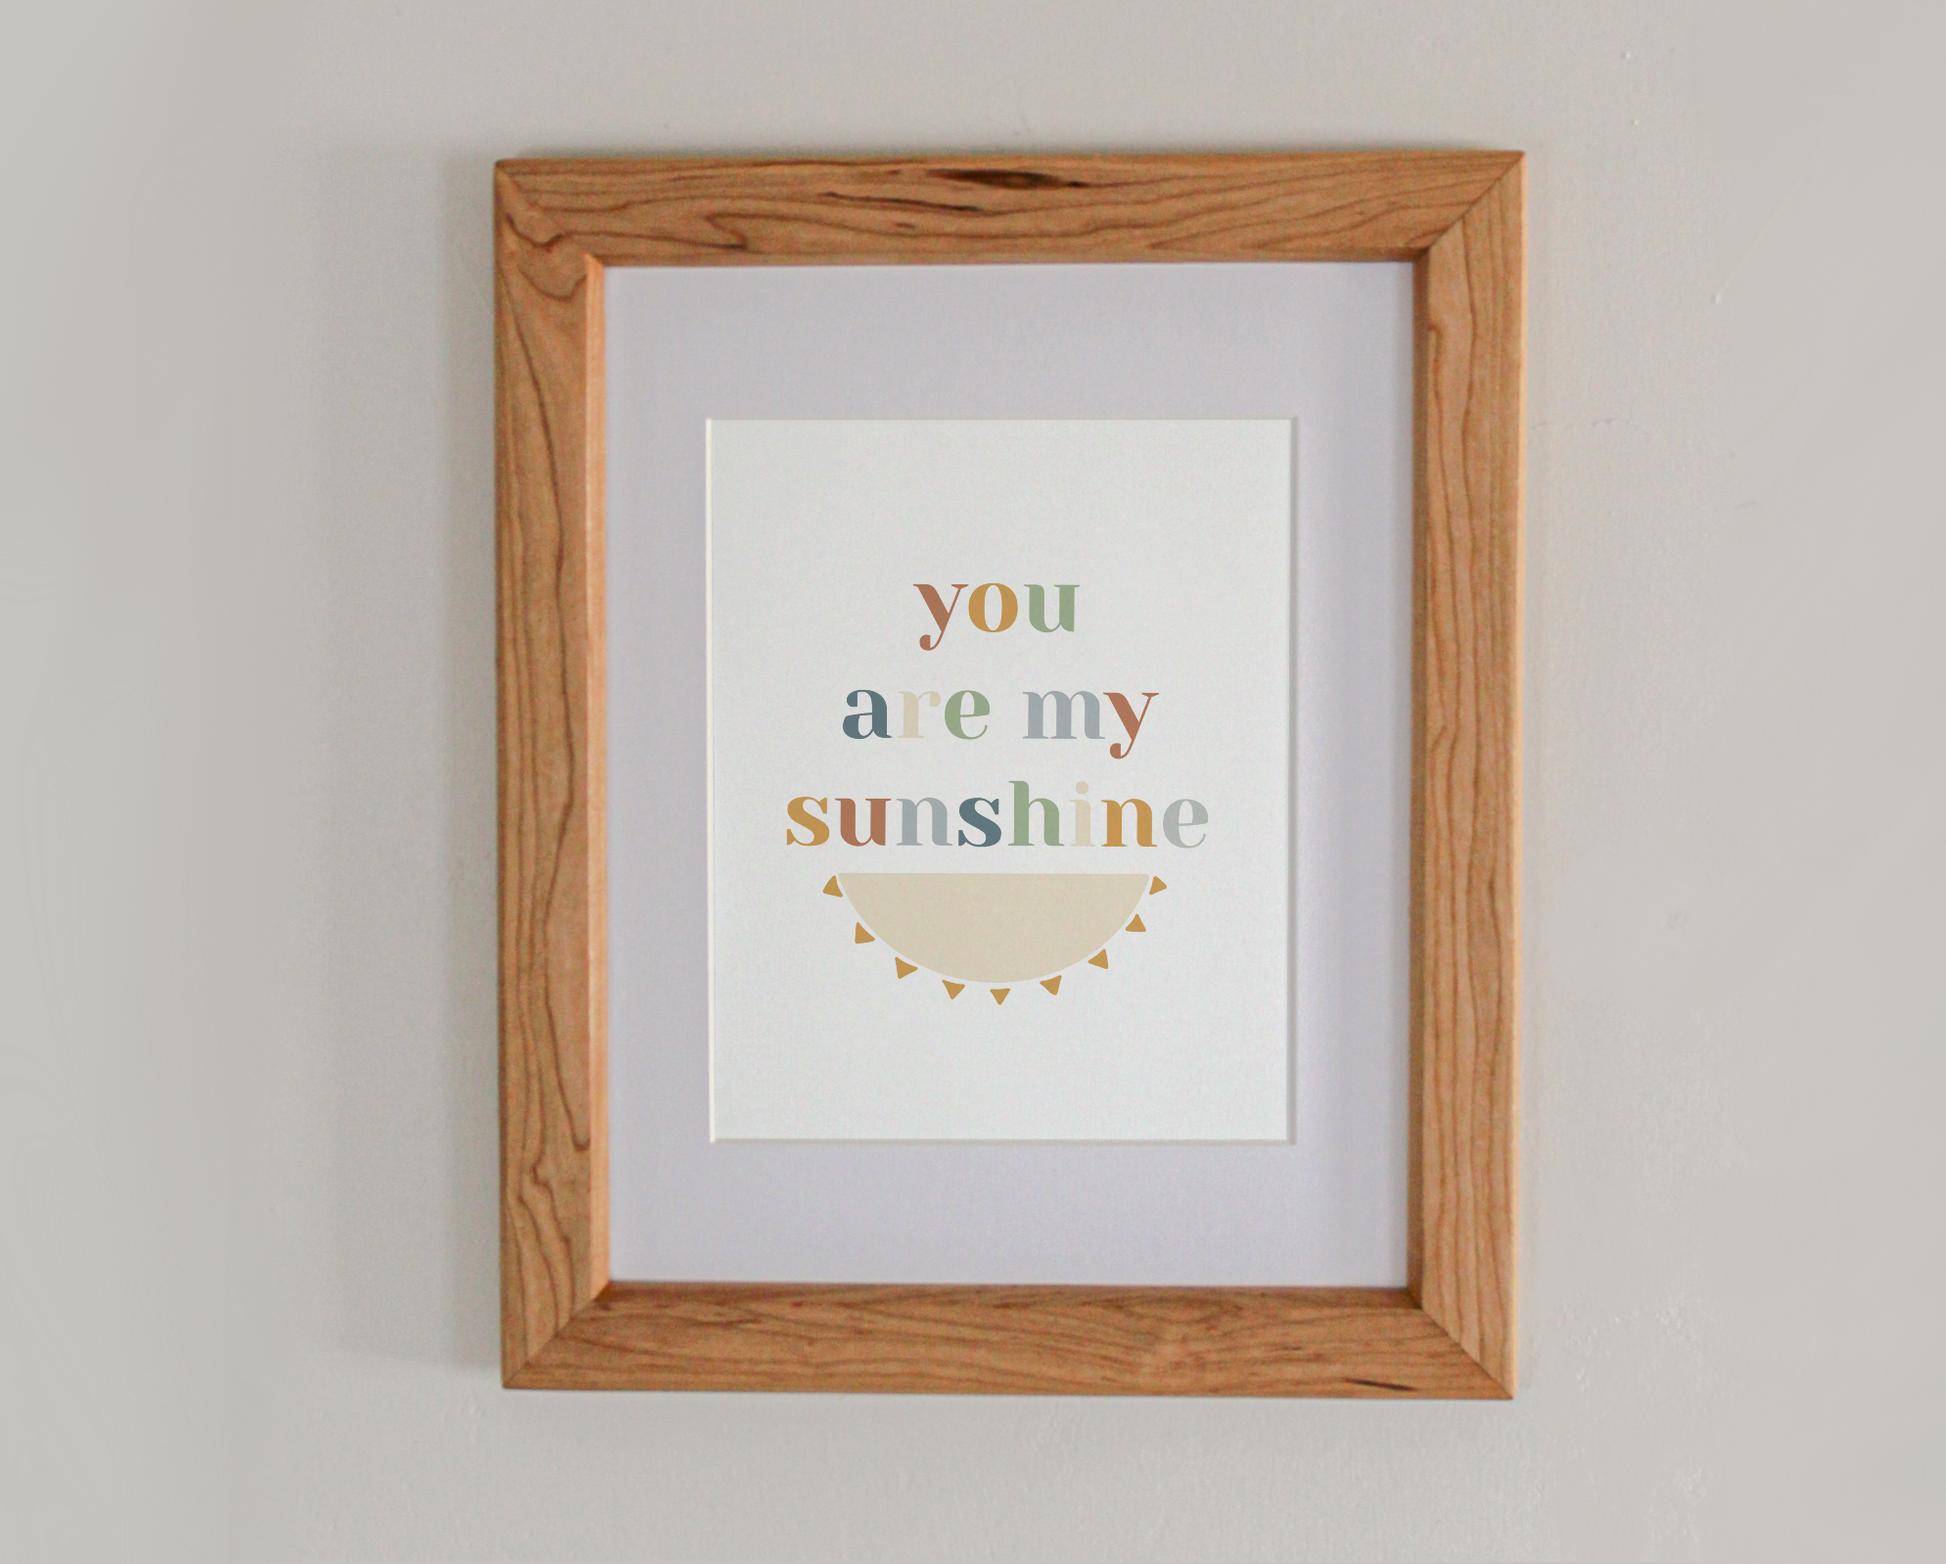 Art print of the text 'you are my sunshine' above the bottom half of an illustrated sun